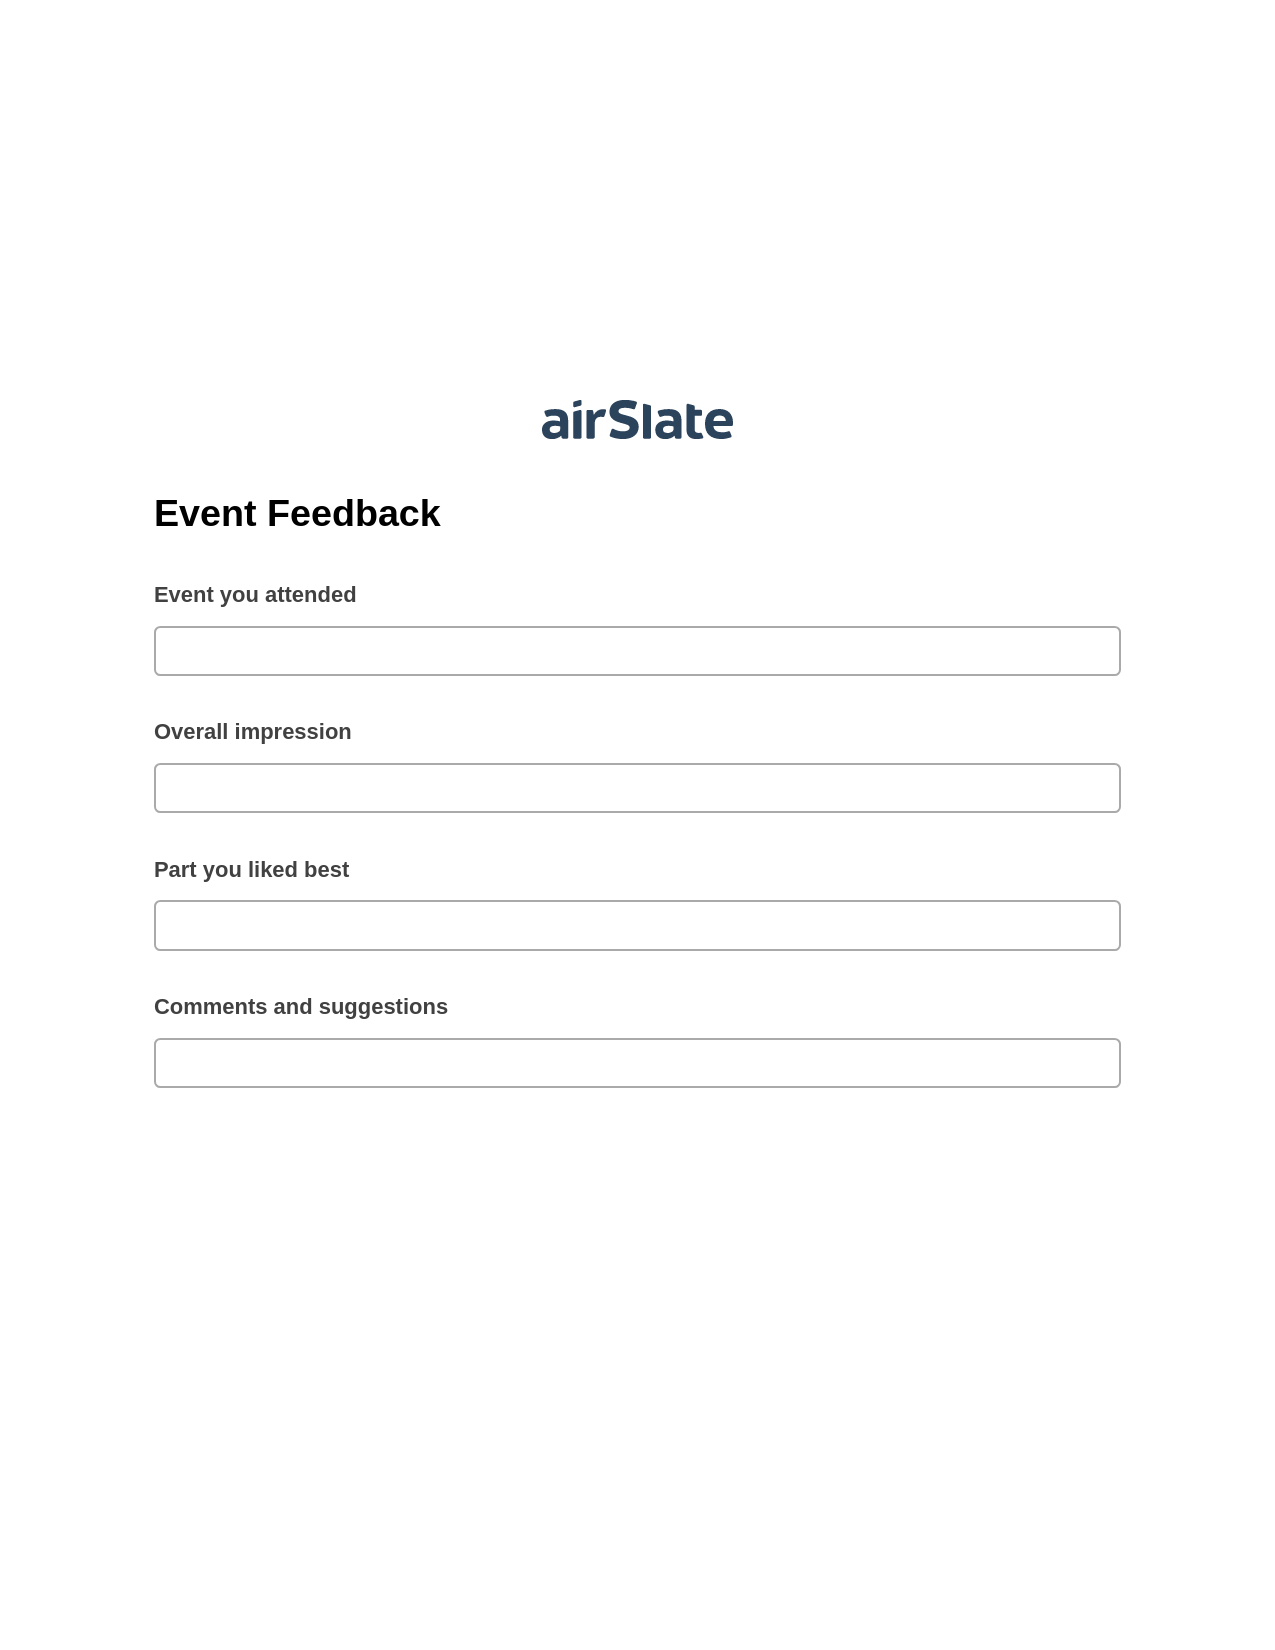 Event Feedback Pre-fill Dropdowns from Google Sheet Bot, Create slate addon, Export to NetSuite Record Bot